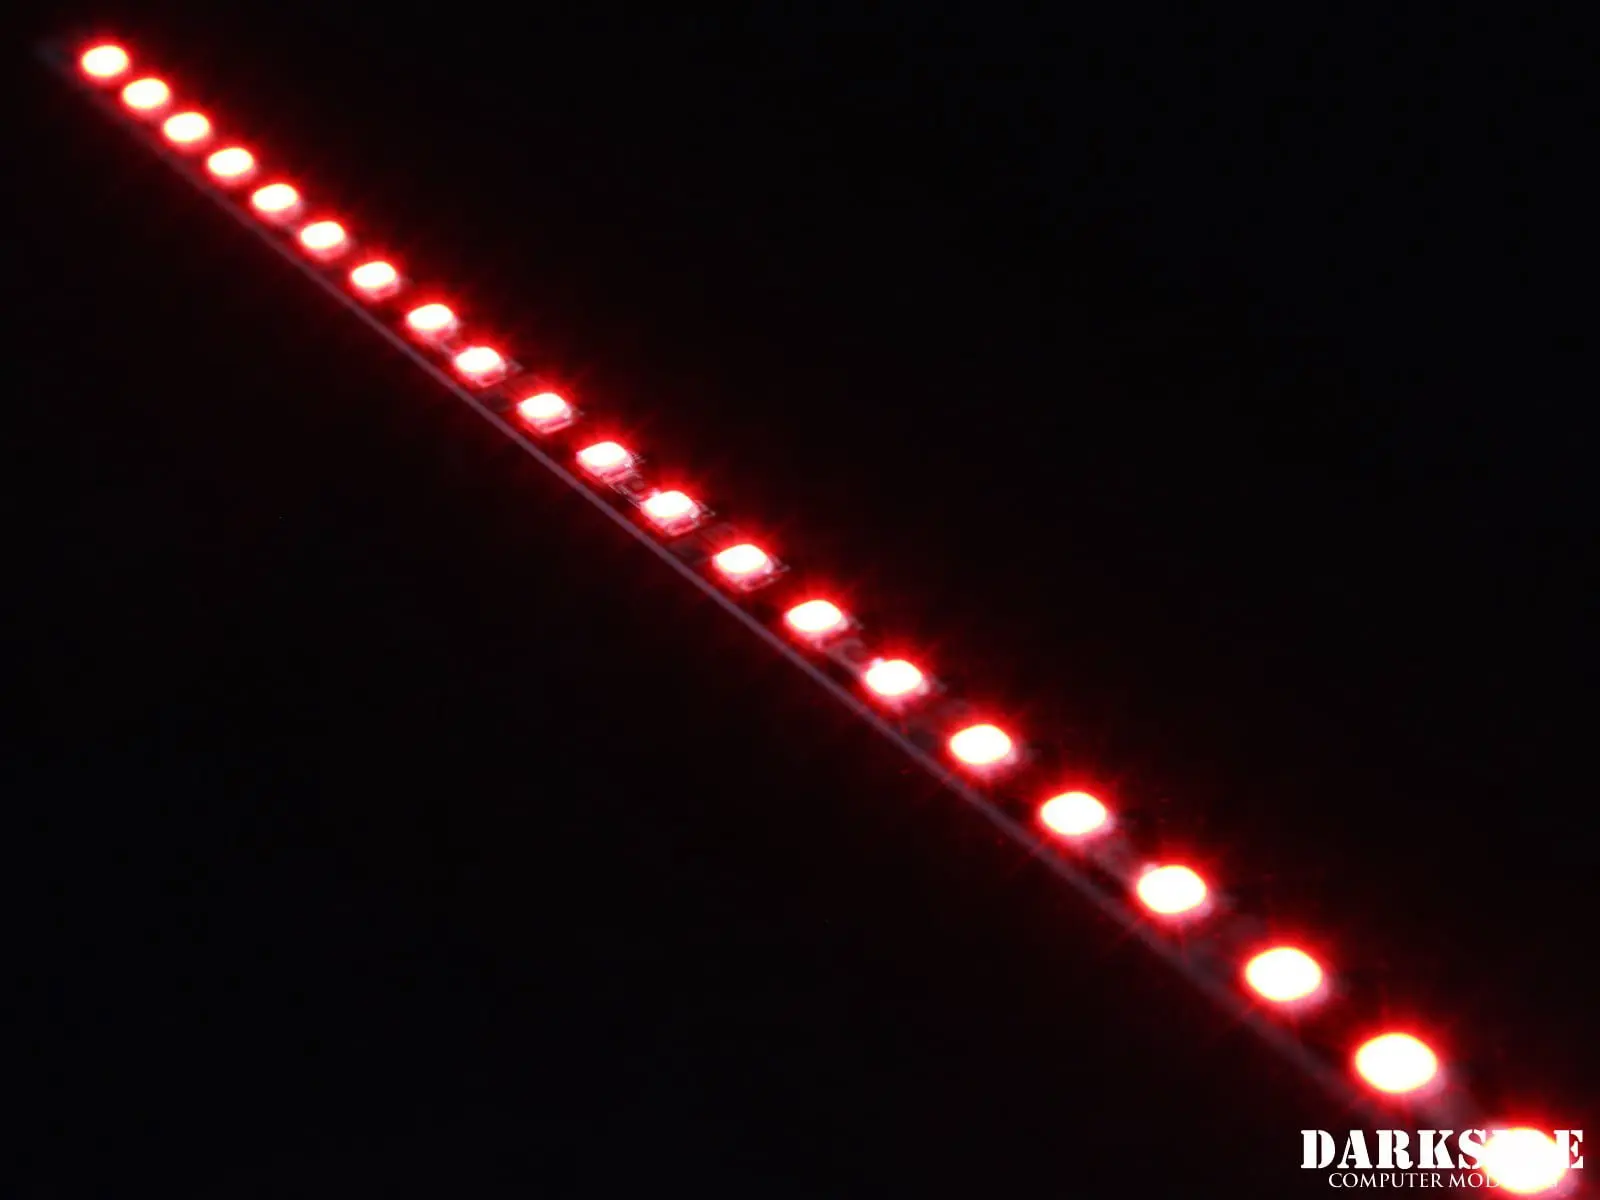 12 (30cm) DarkSide CONNECT G2 Dimmable Rigid LED Strip - RED G2 - DazMode